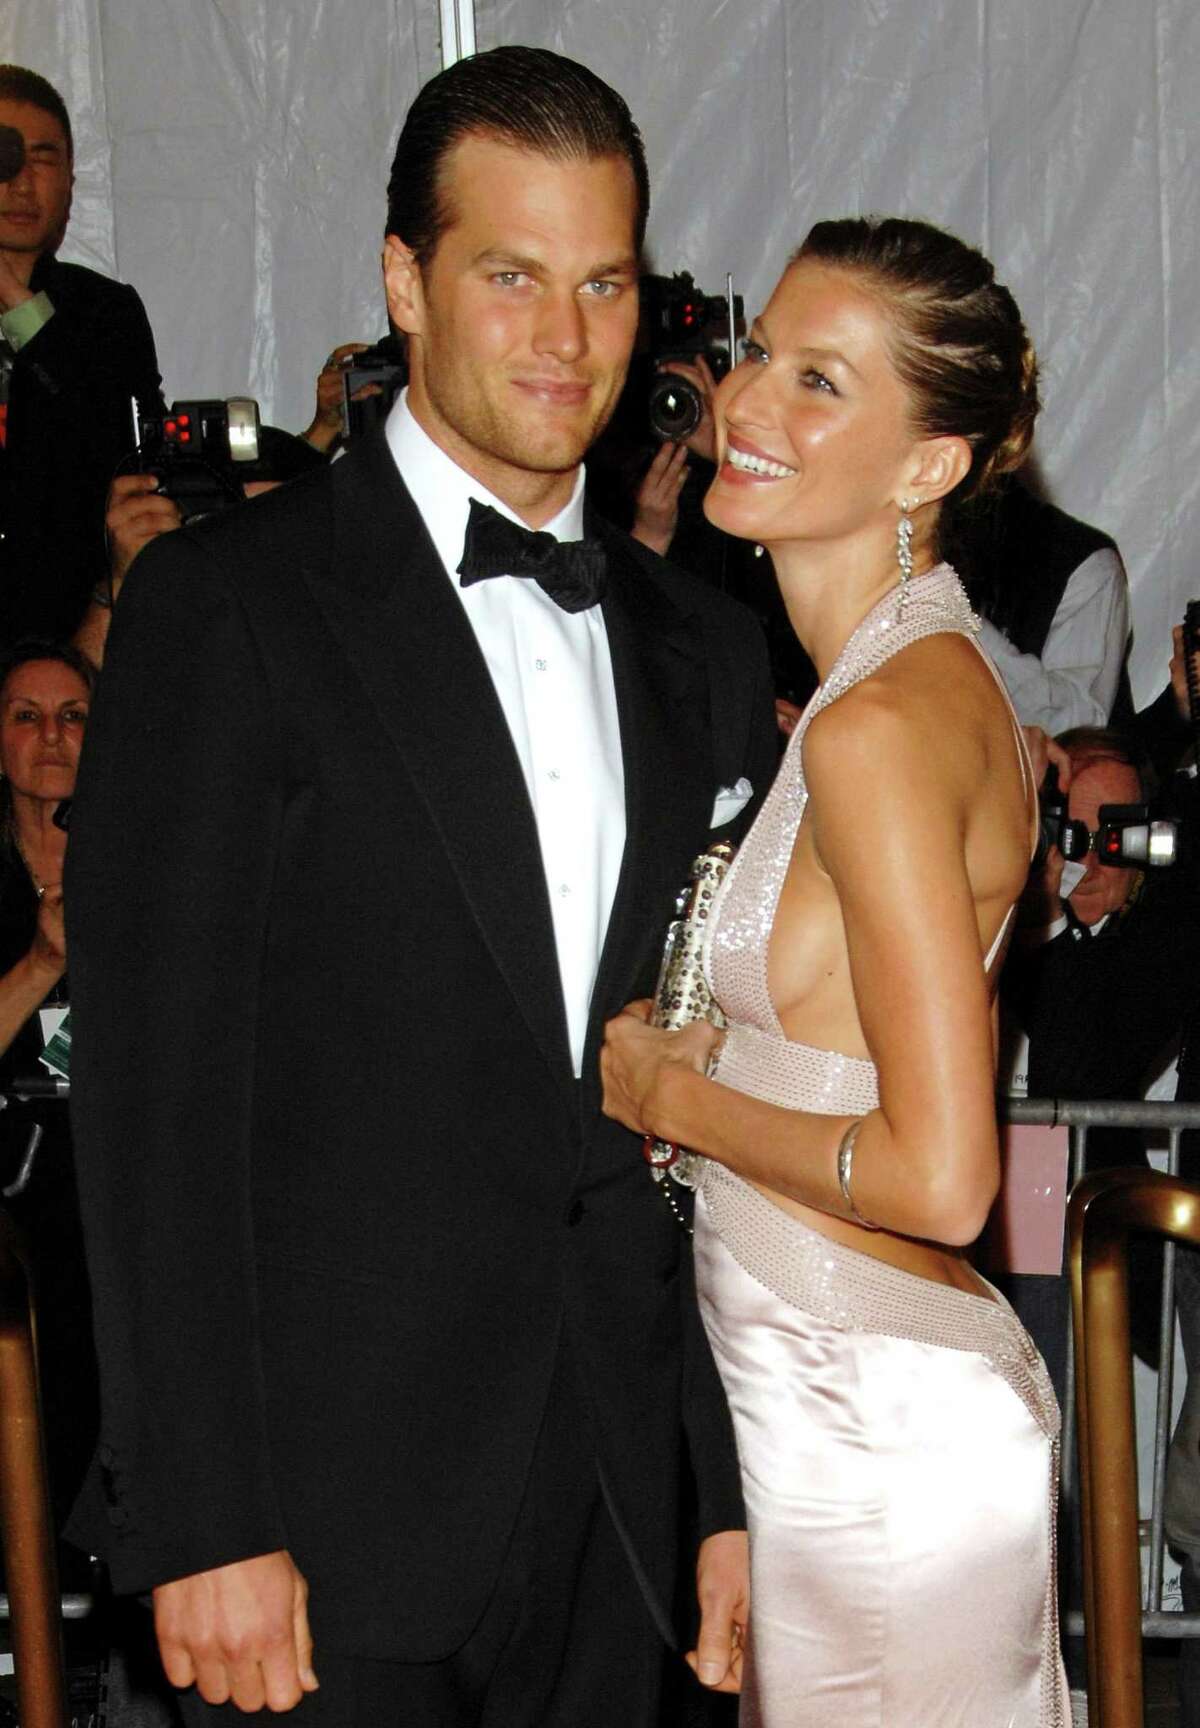 In this May 5, 2008 photo, Tom Brady and Gisele Bundchen arrive at the Metropolitan Museum of Art's Costume Institute Gala, in New York.